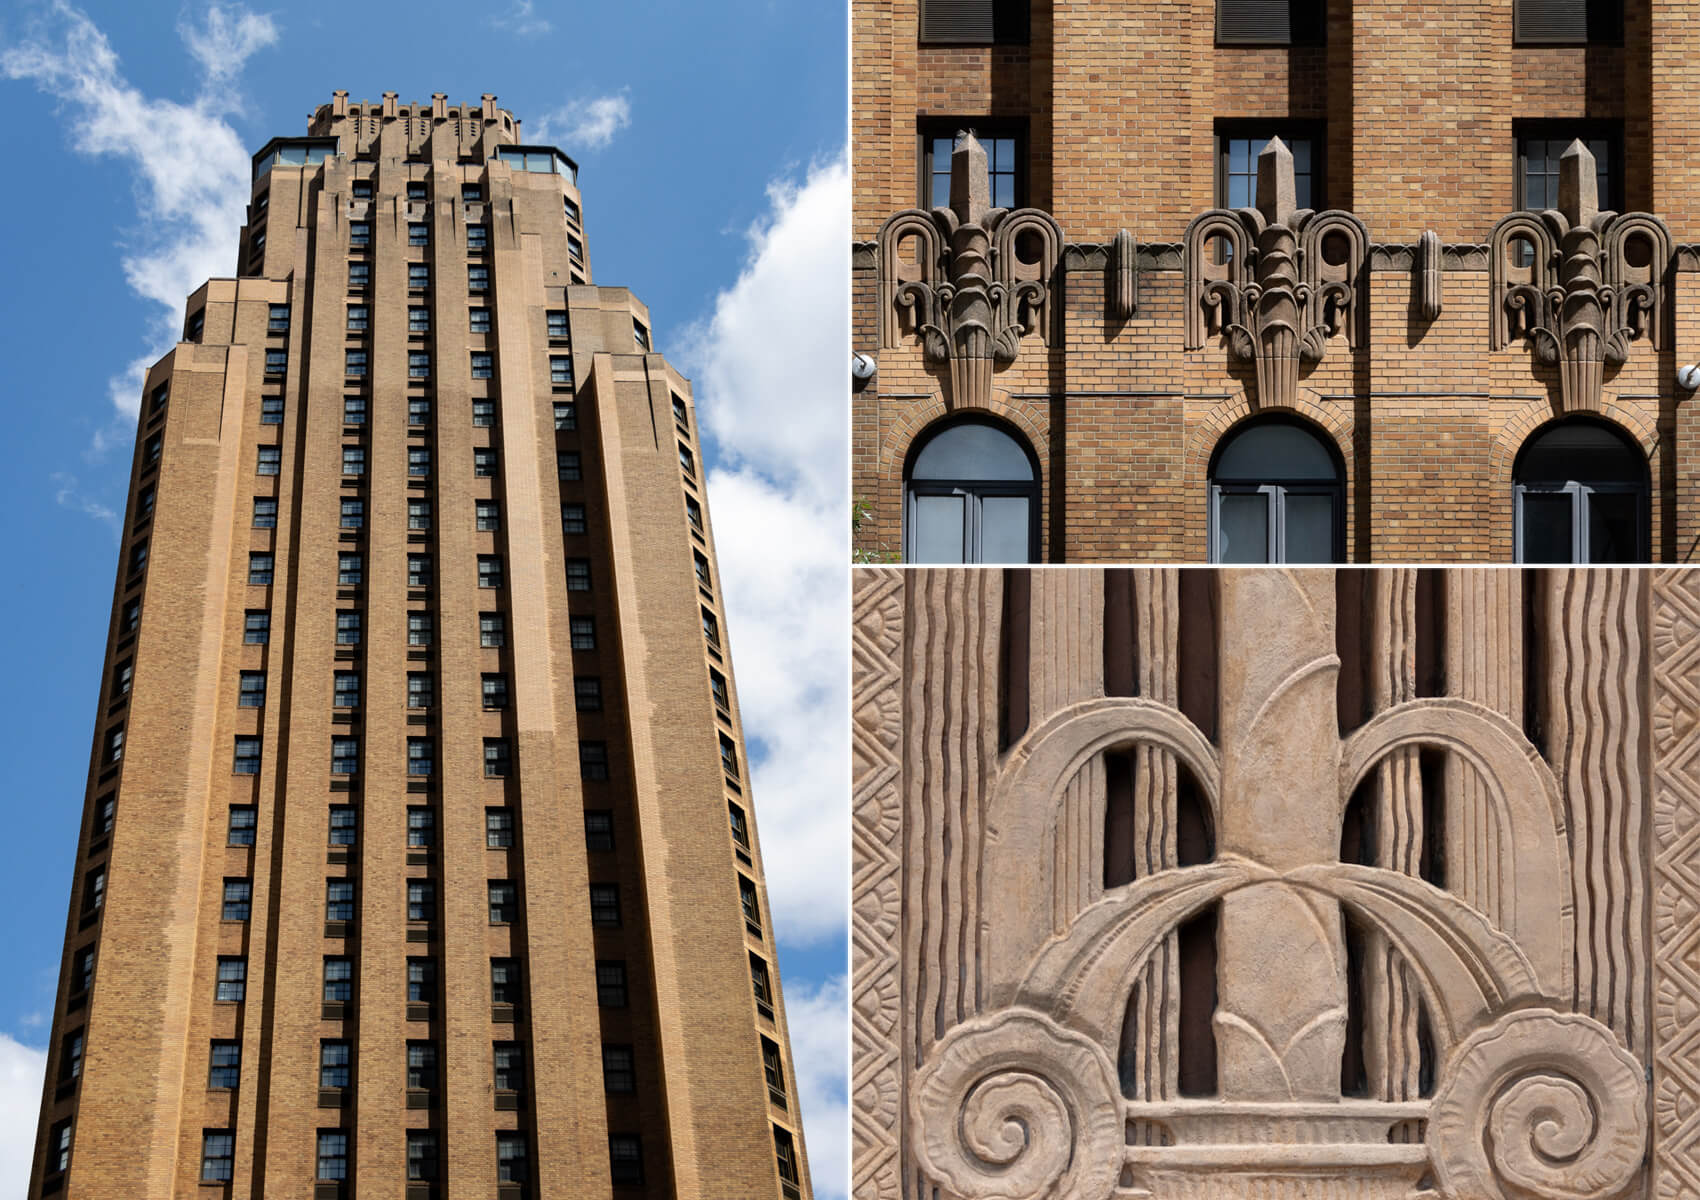 details of the art deco panhellenic tower